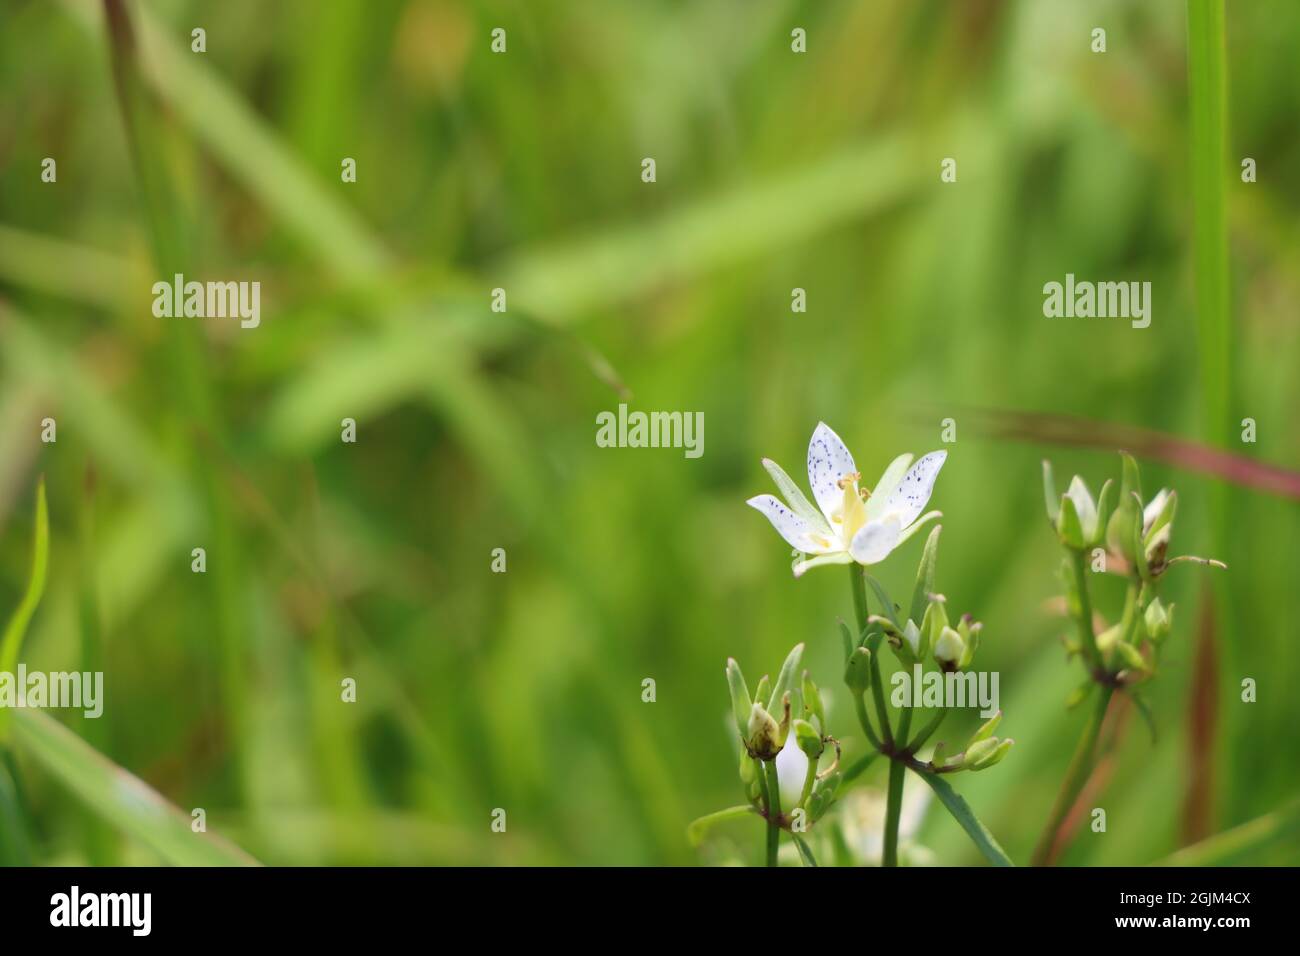 Closeup shot of a growing Chickweed plant Stock Photo